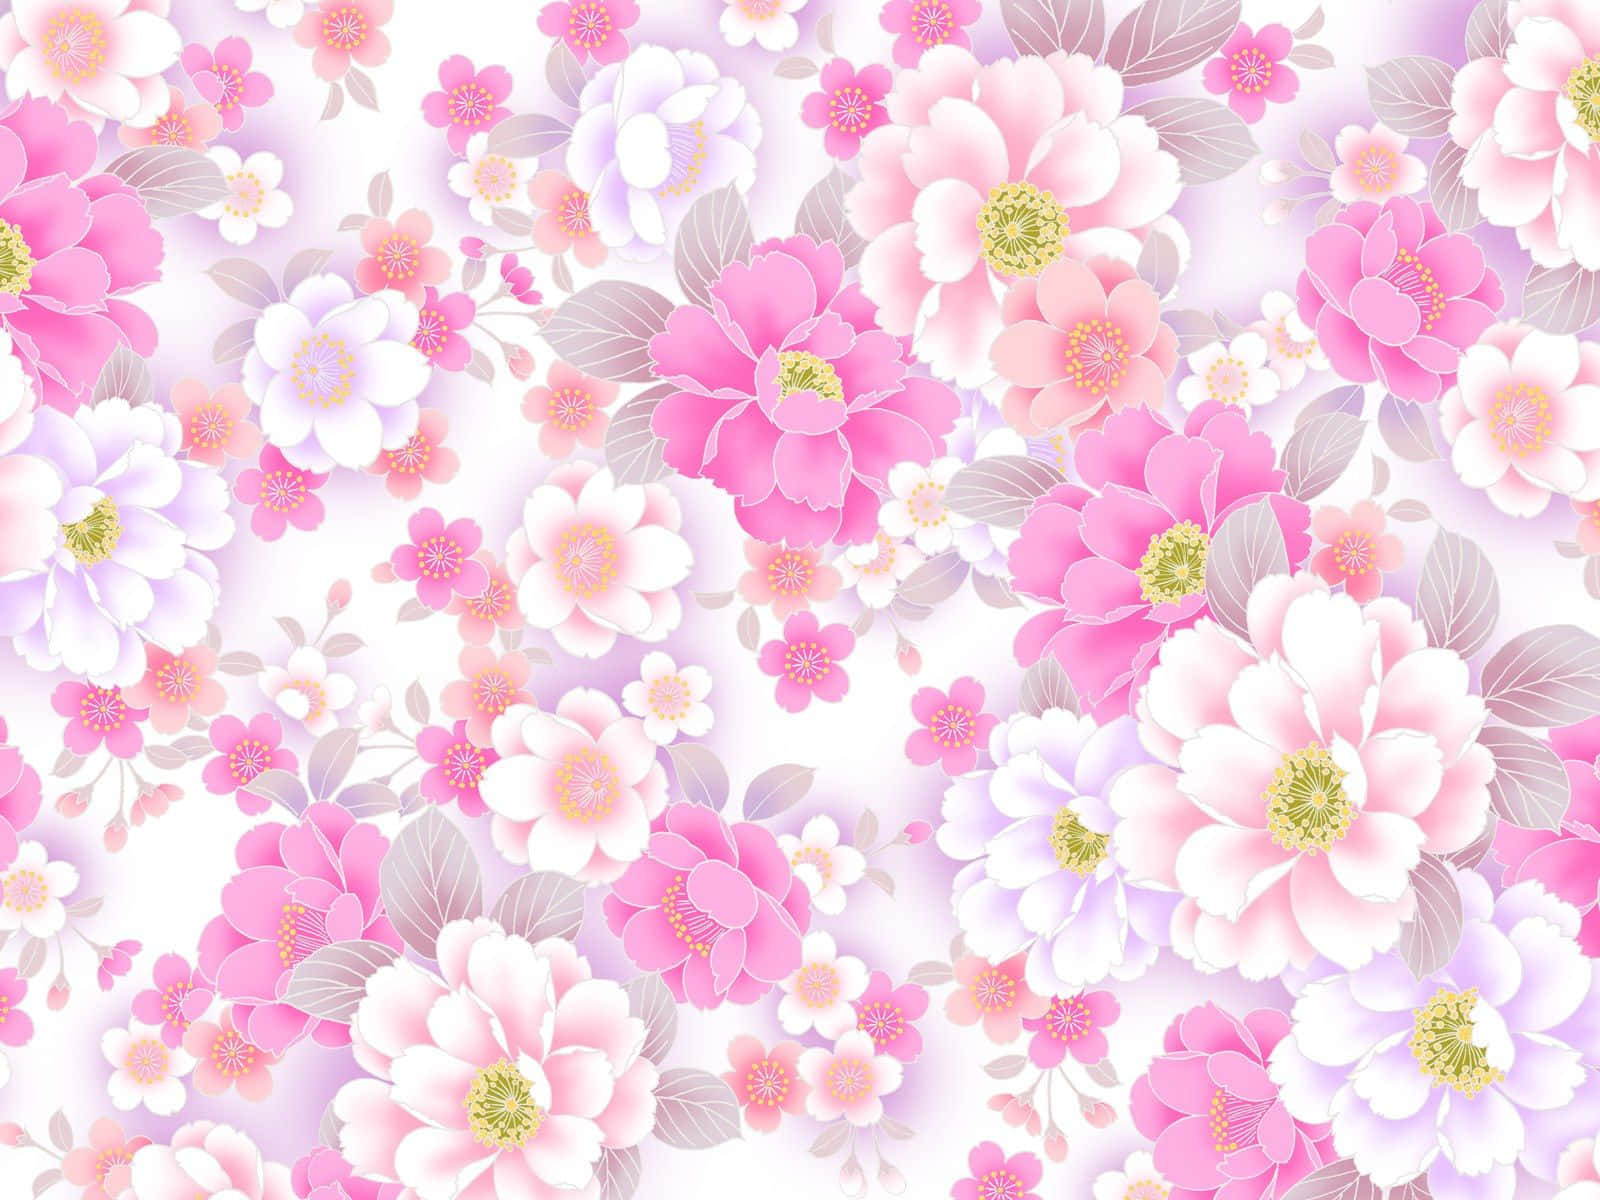 Charming Blooms - Enchanting Flower Background